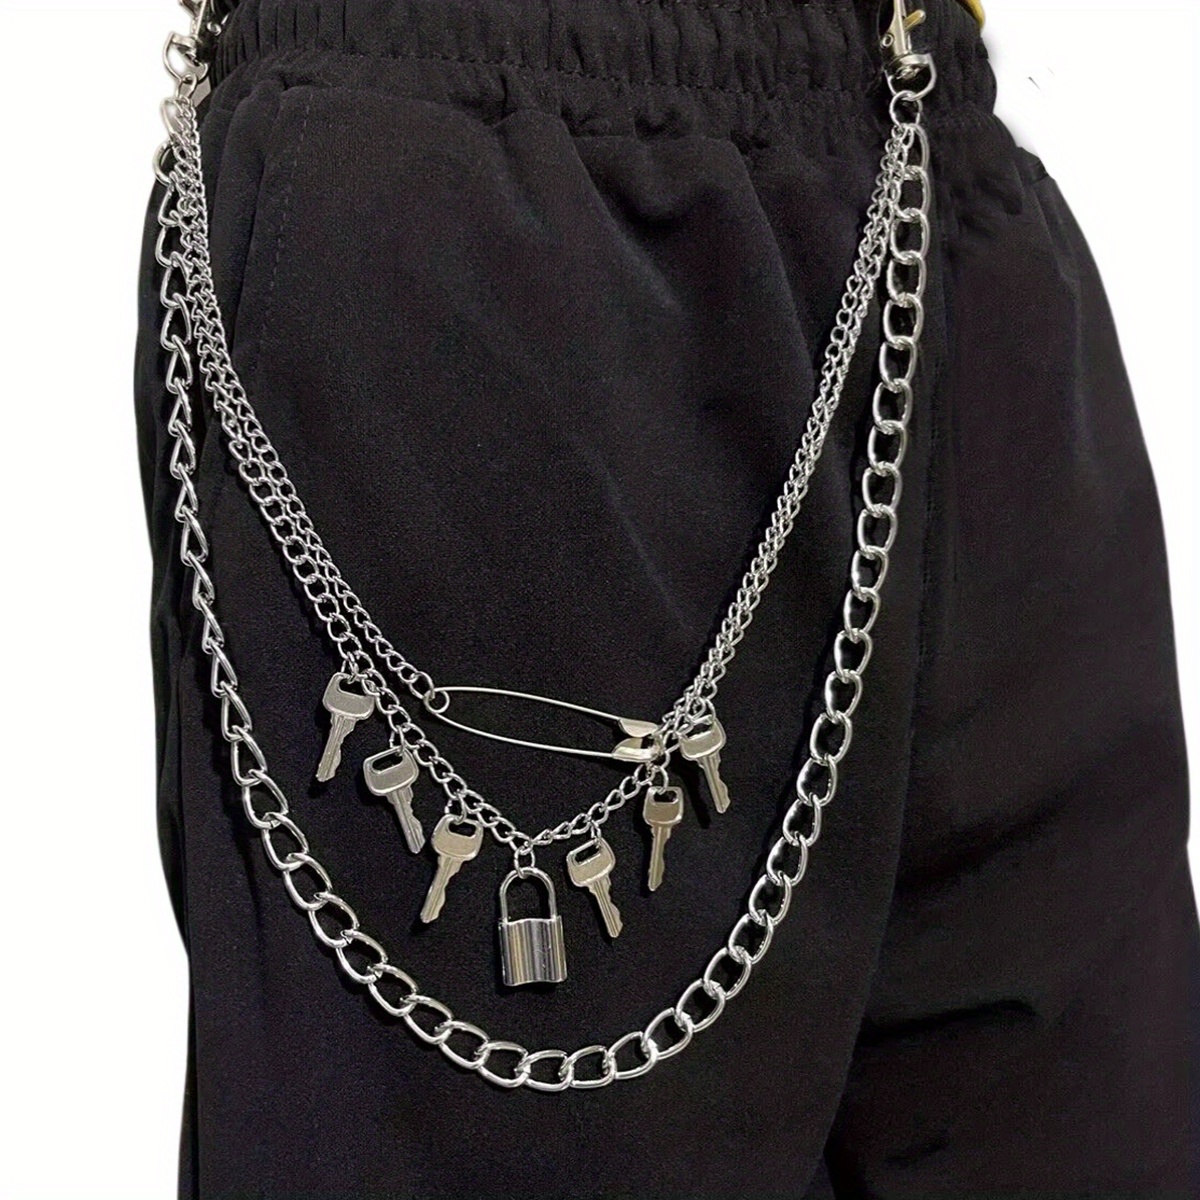 Adjustable Black Tone Pants Chain For Men And Women 2 Lines Curb Design Hip  Hop Sn Metal Clothing Accessory And Jewelry Pc03 H0915 From Sihuai05,  $10.17